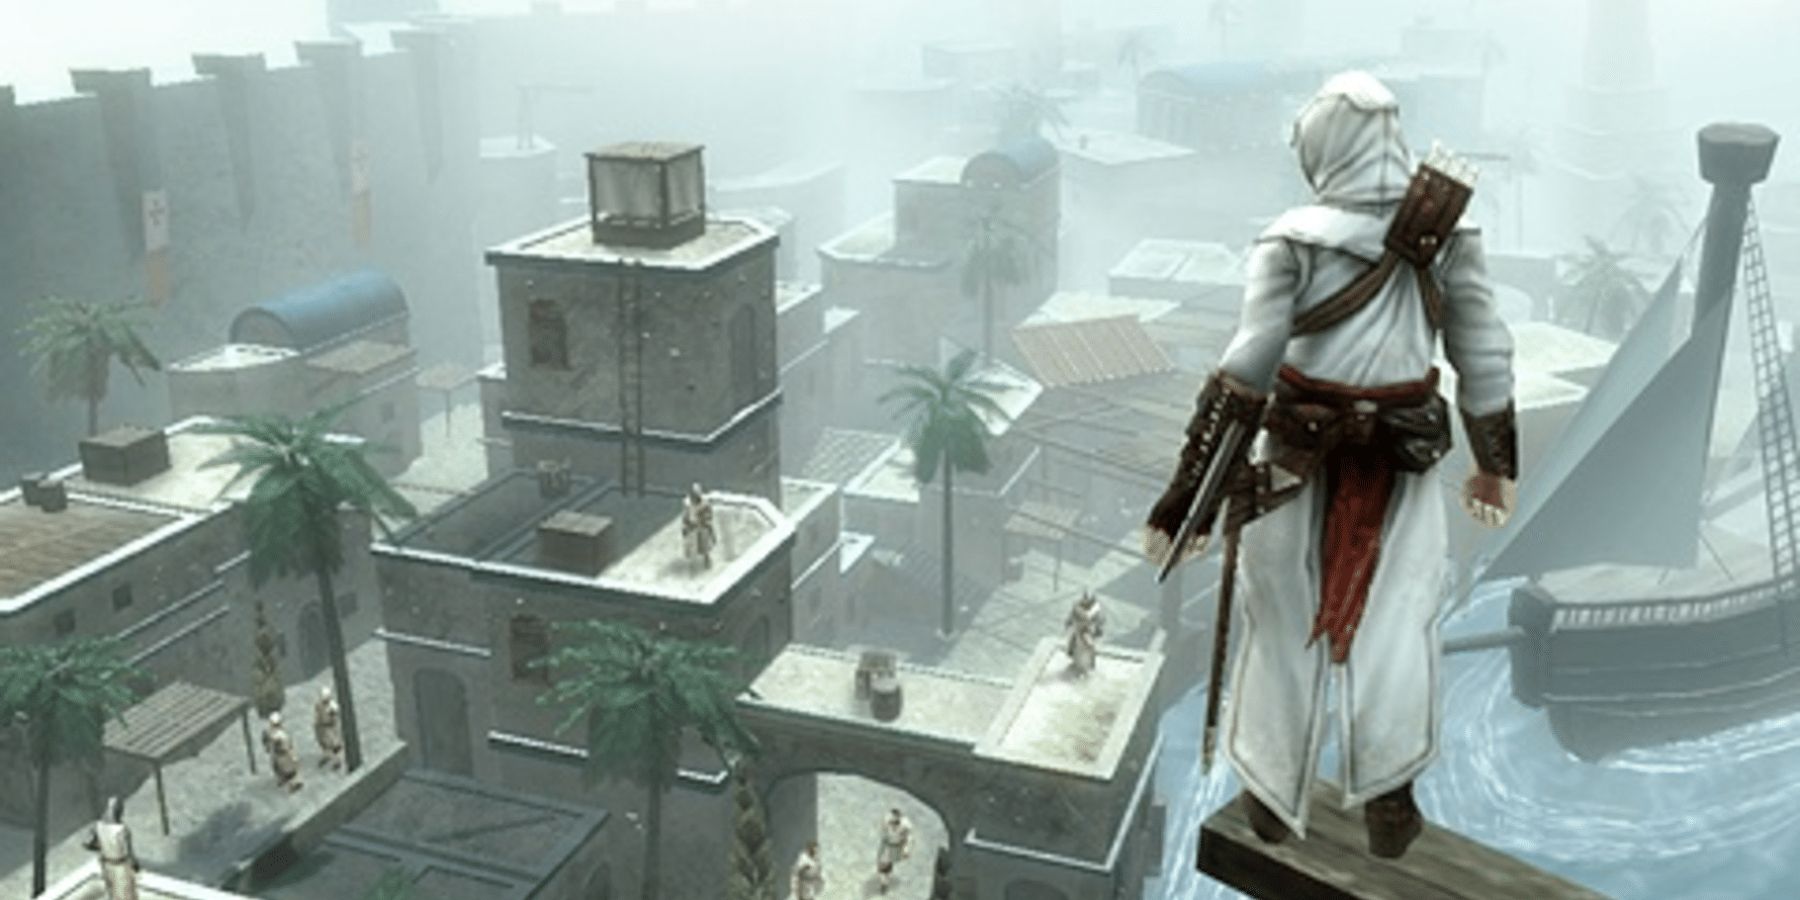 All The Assassins Creed Games Ranked Worst To Best (According To Metacritic)